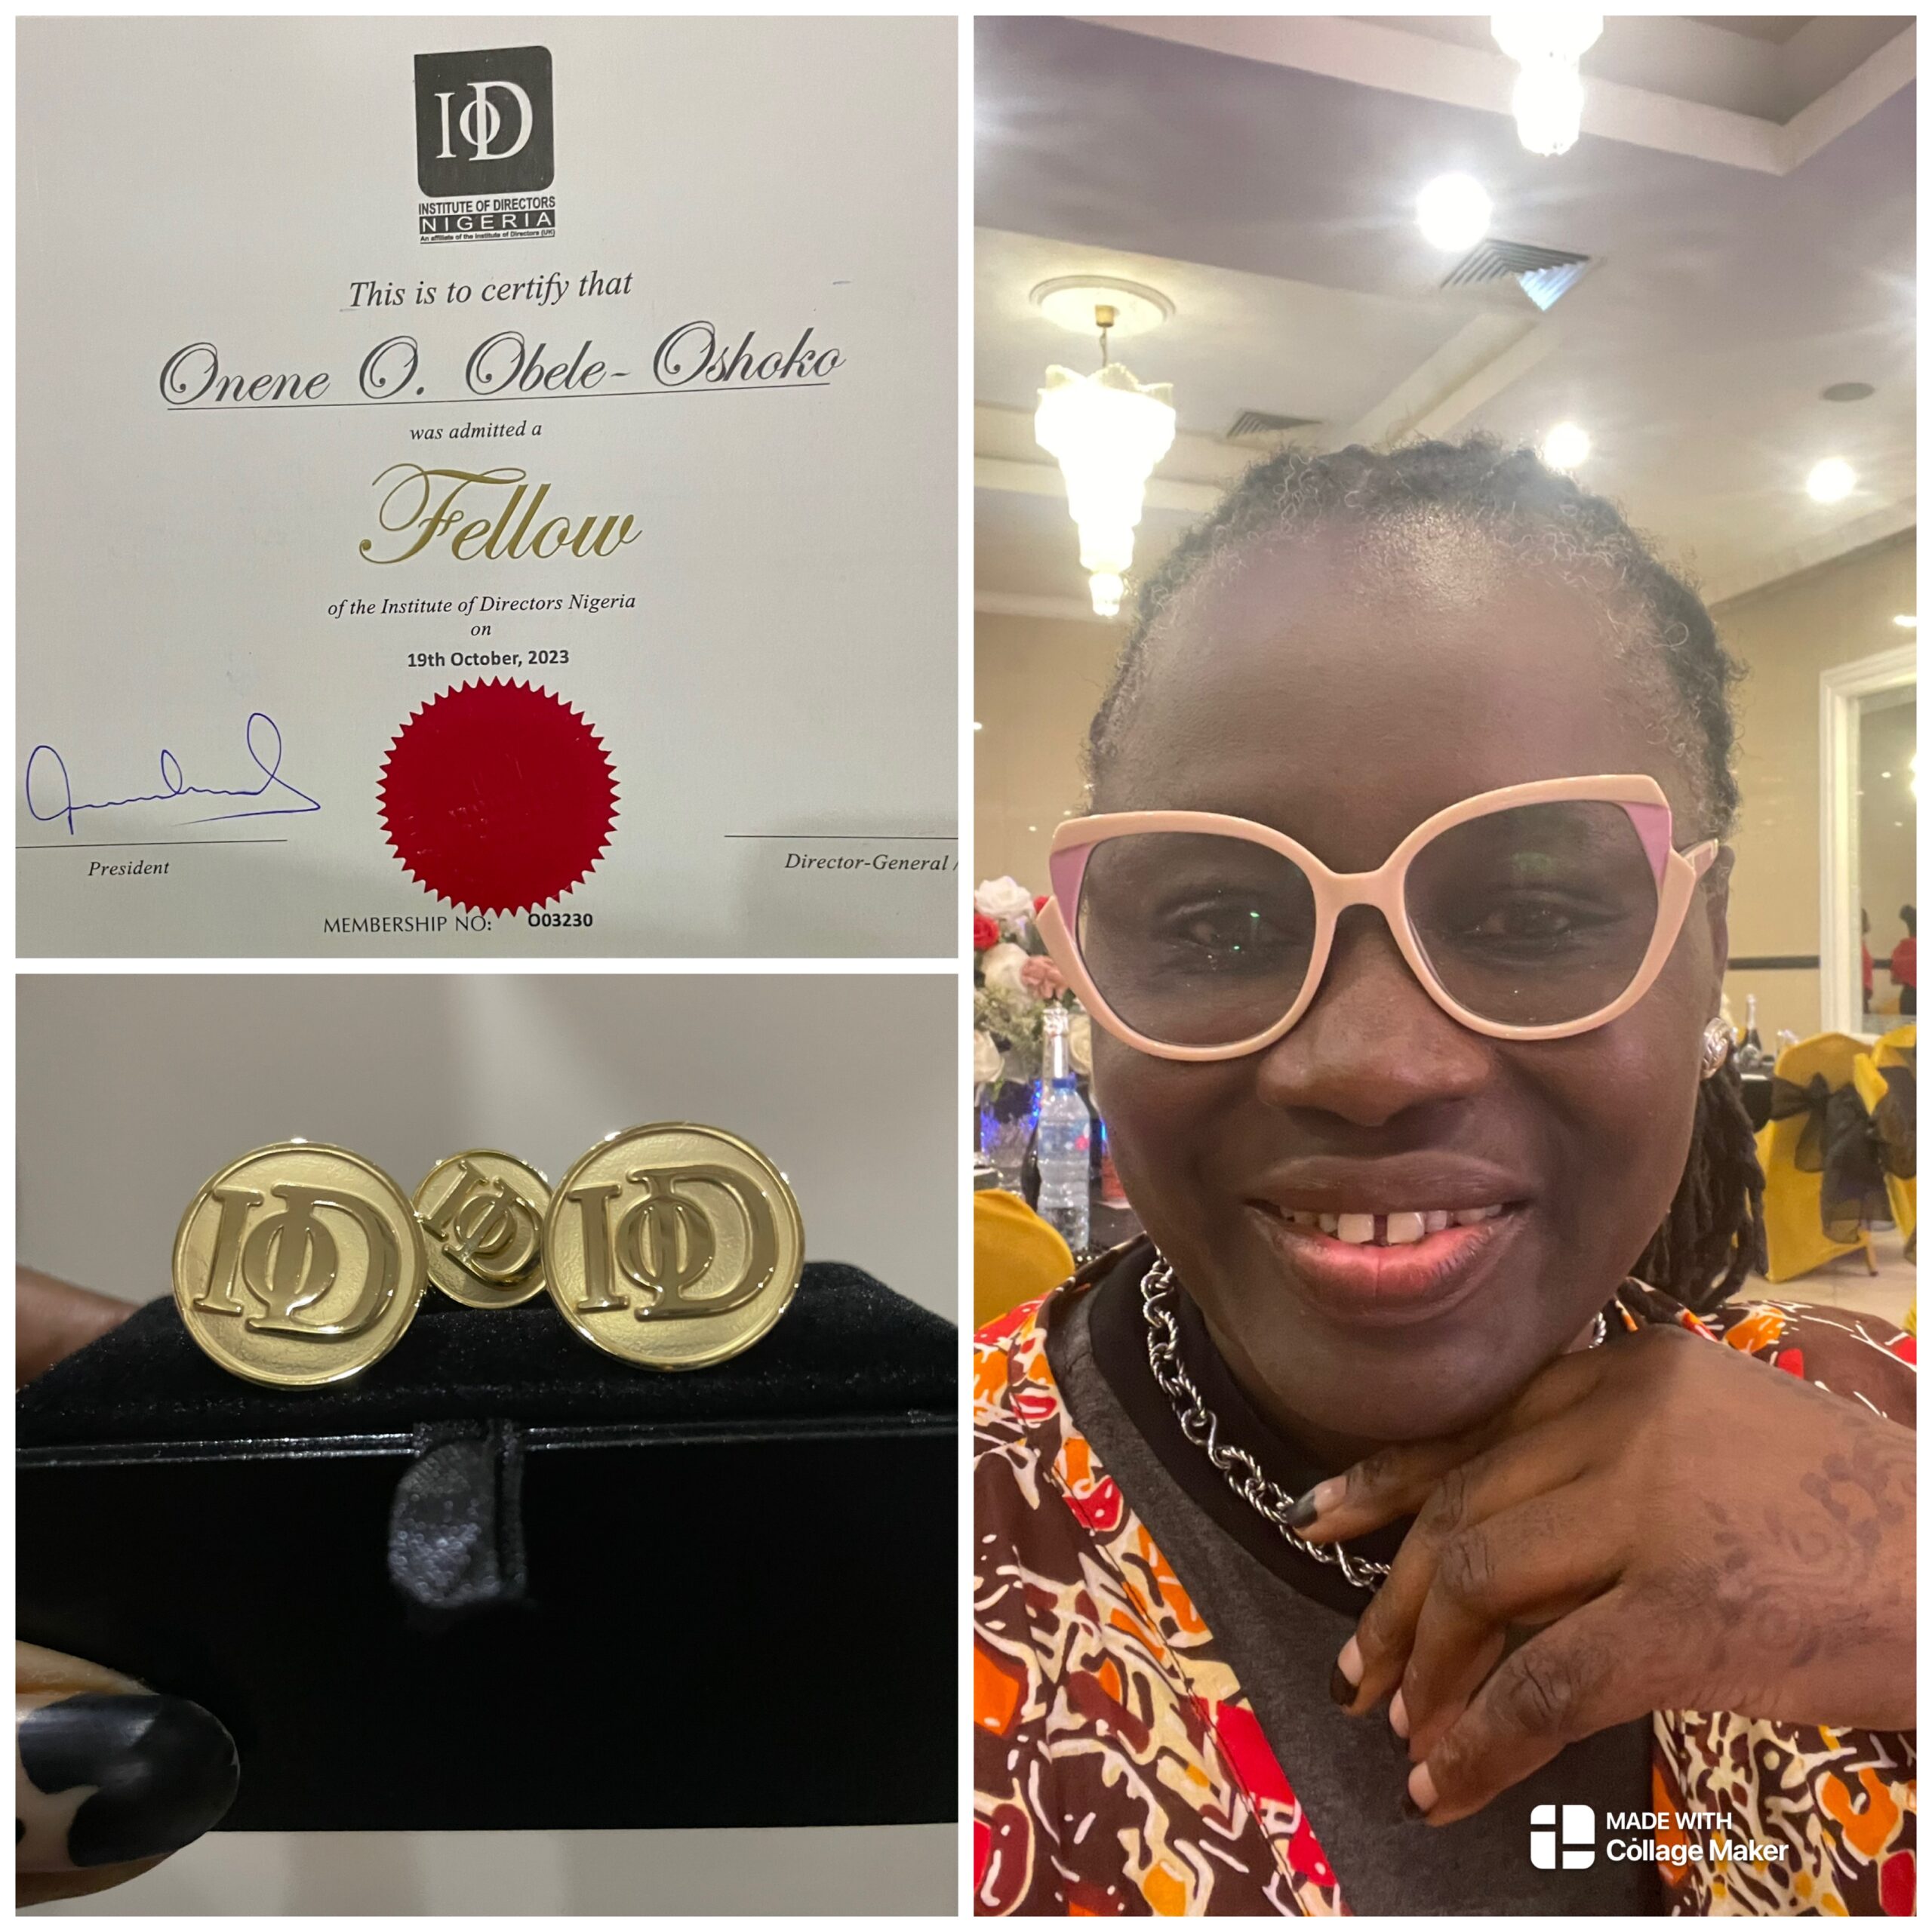 Being a Fellow of Chartered Institute of Directors Nigeria